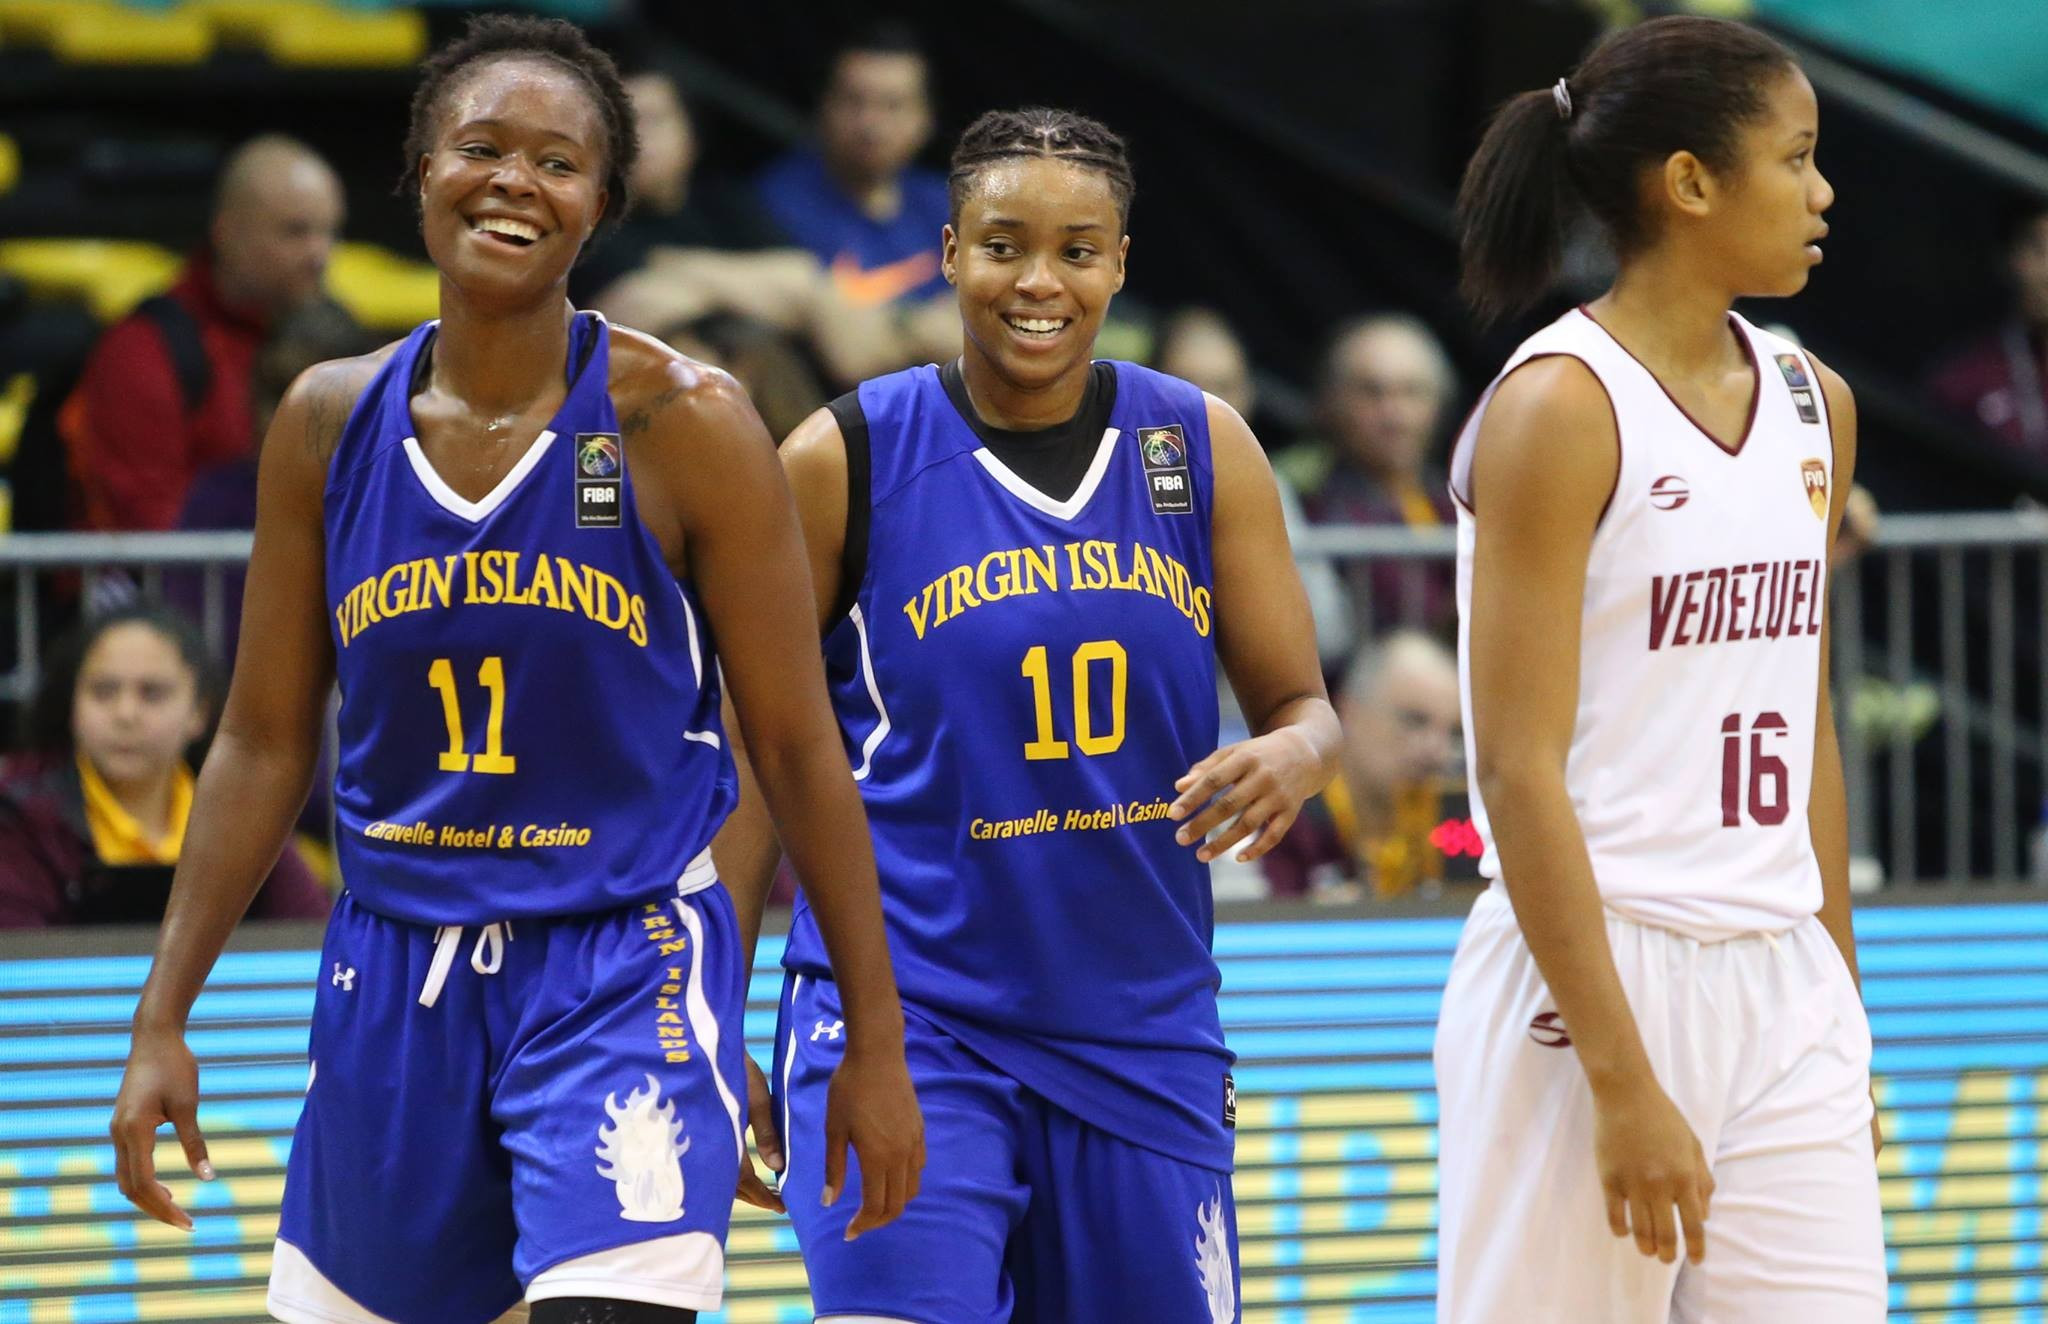 The Virgin Islands claimed their first FIBA Women's AmeriCup victory today ©FIBA